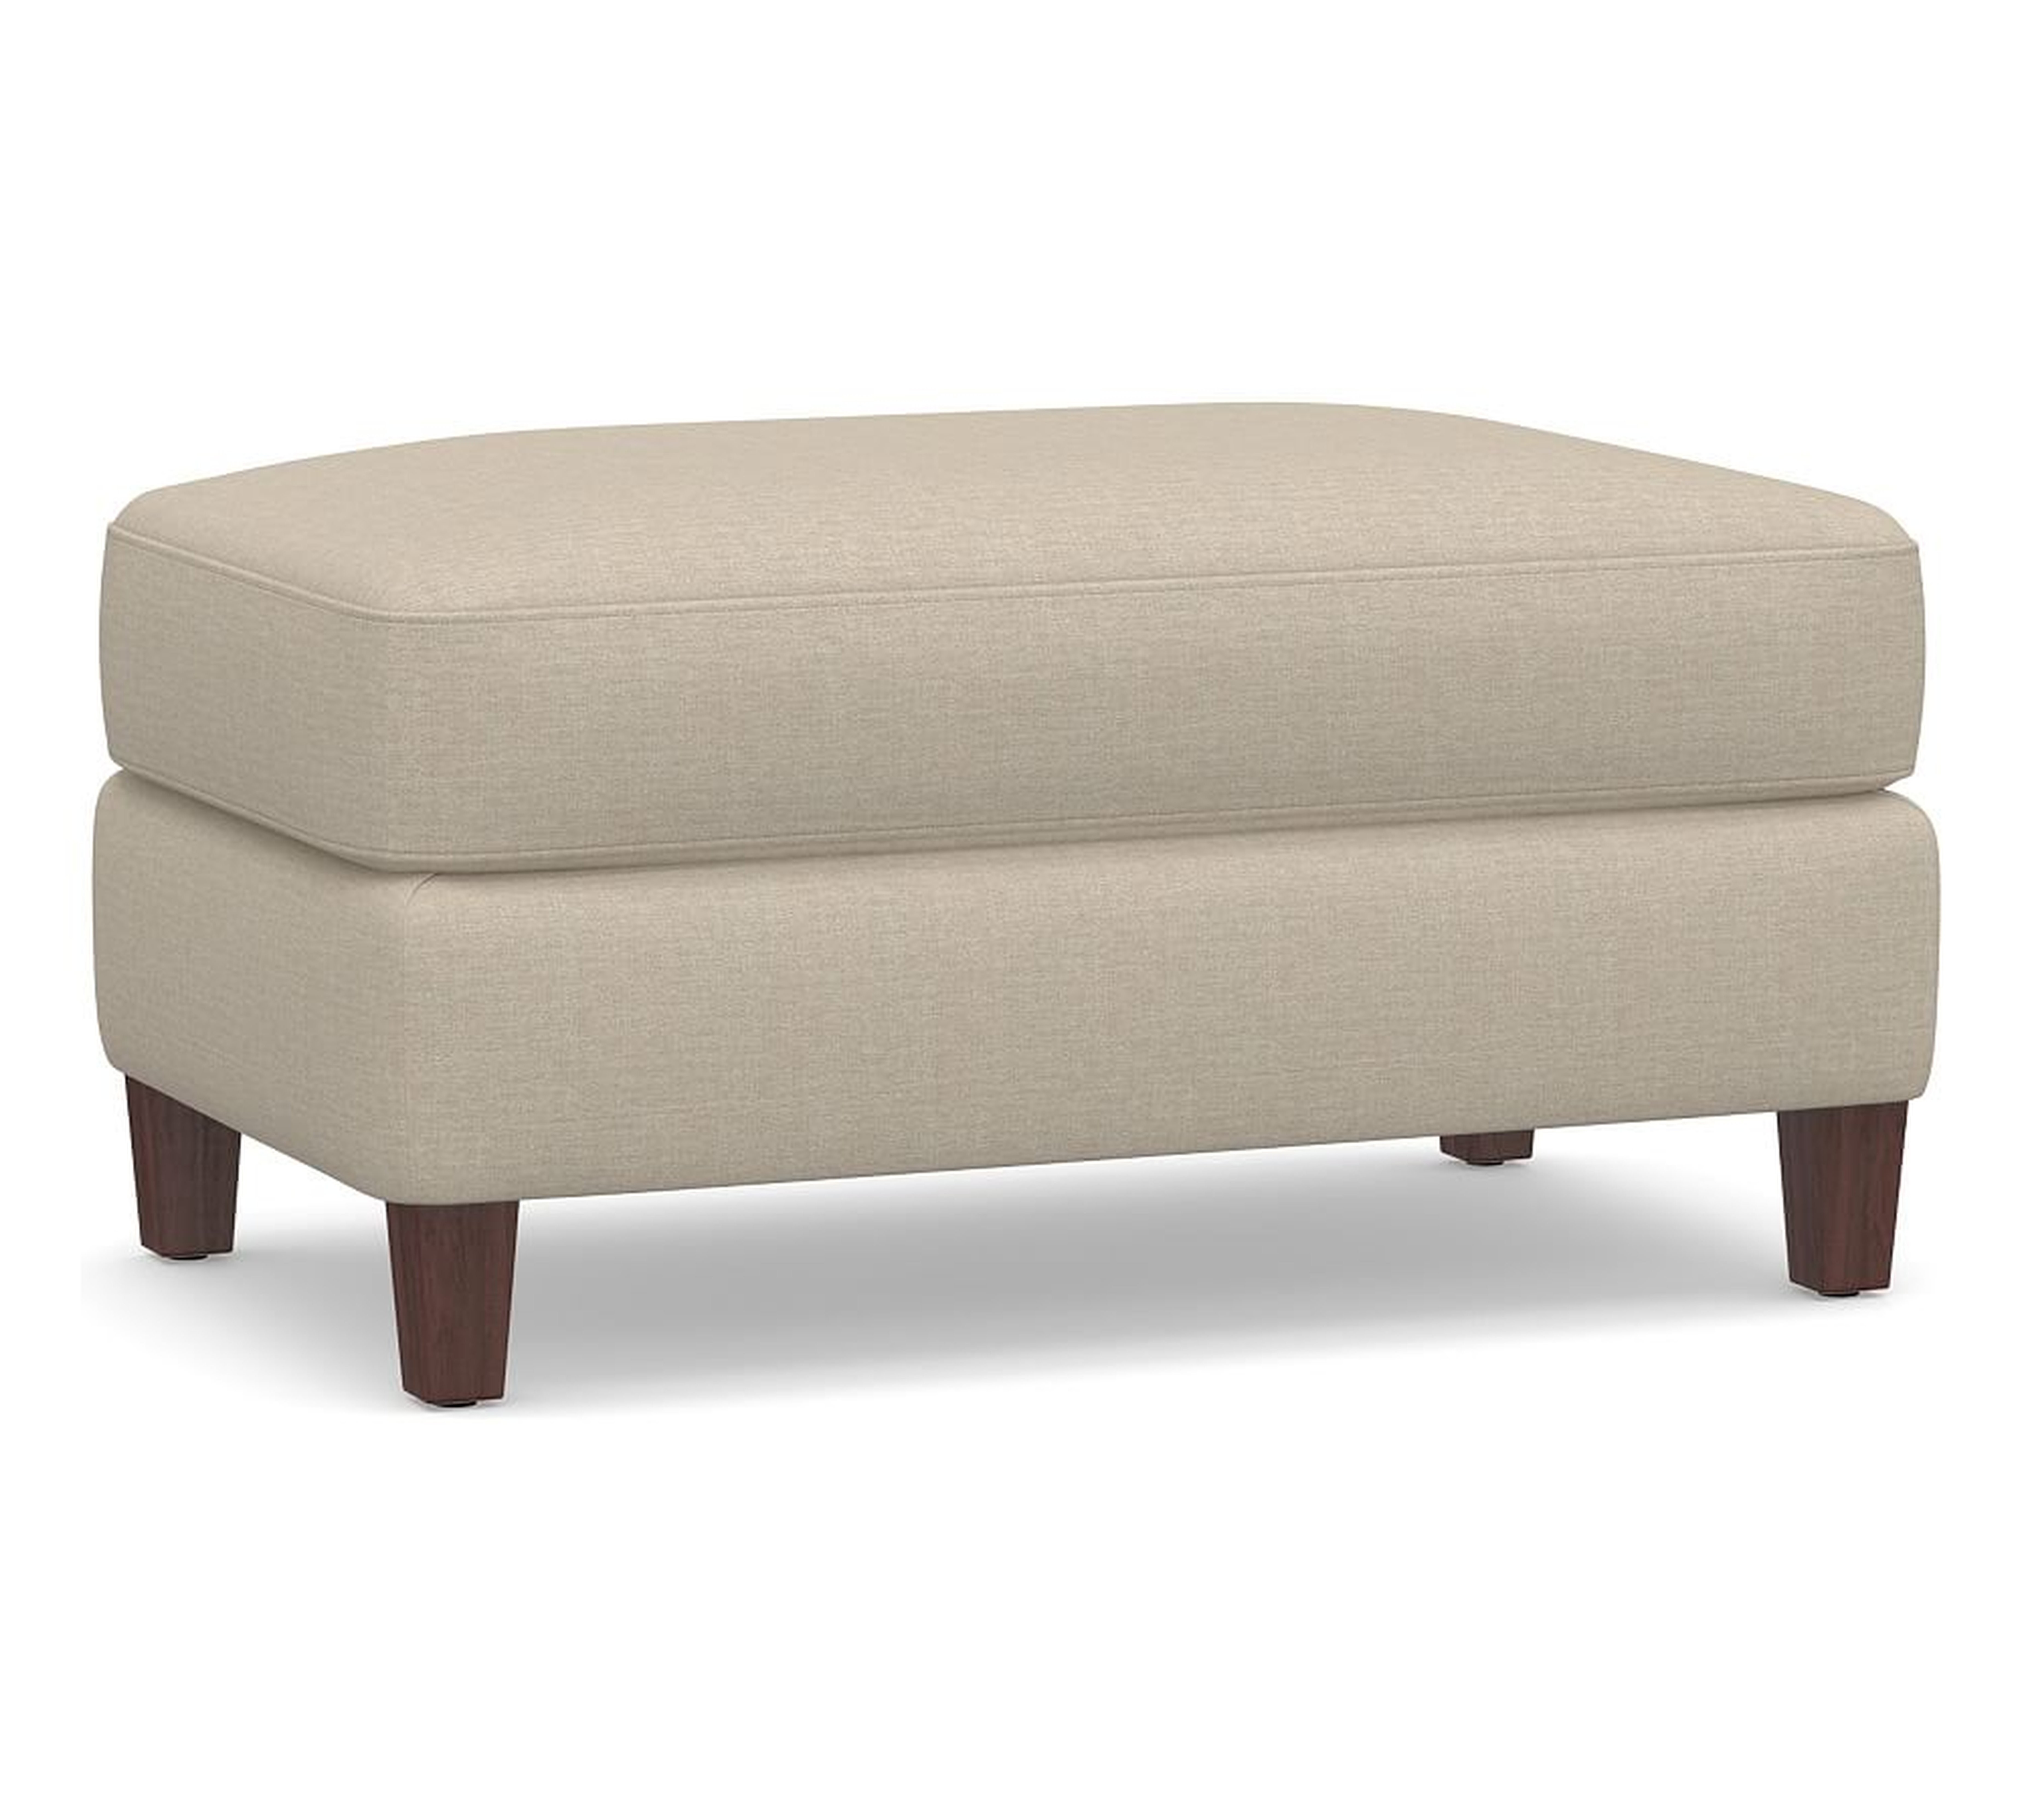 SoMa Ember Upholstered Ottoman, Polyester Wrapped Cushions, Brushed Crossweave Natural - Pottery Barn